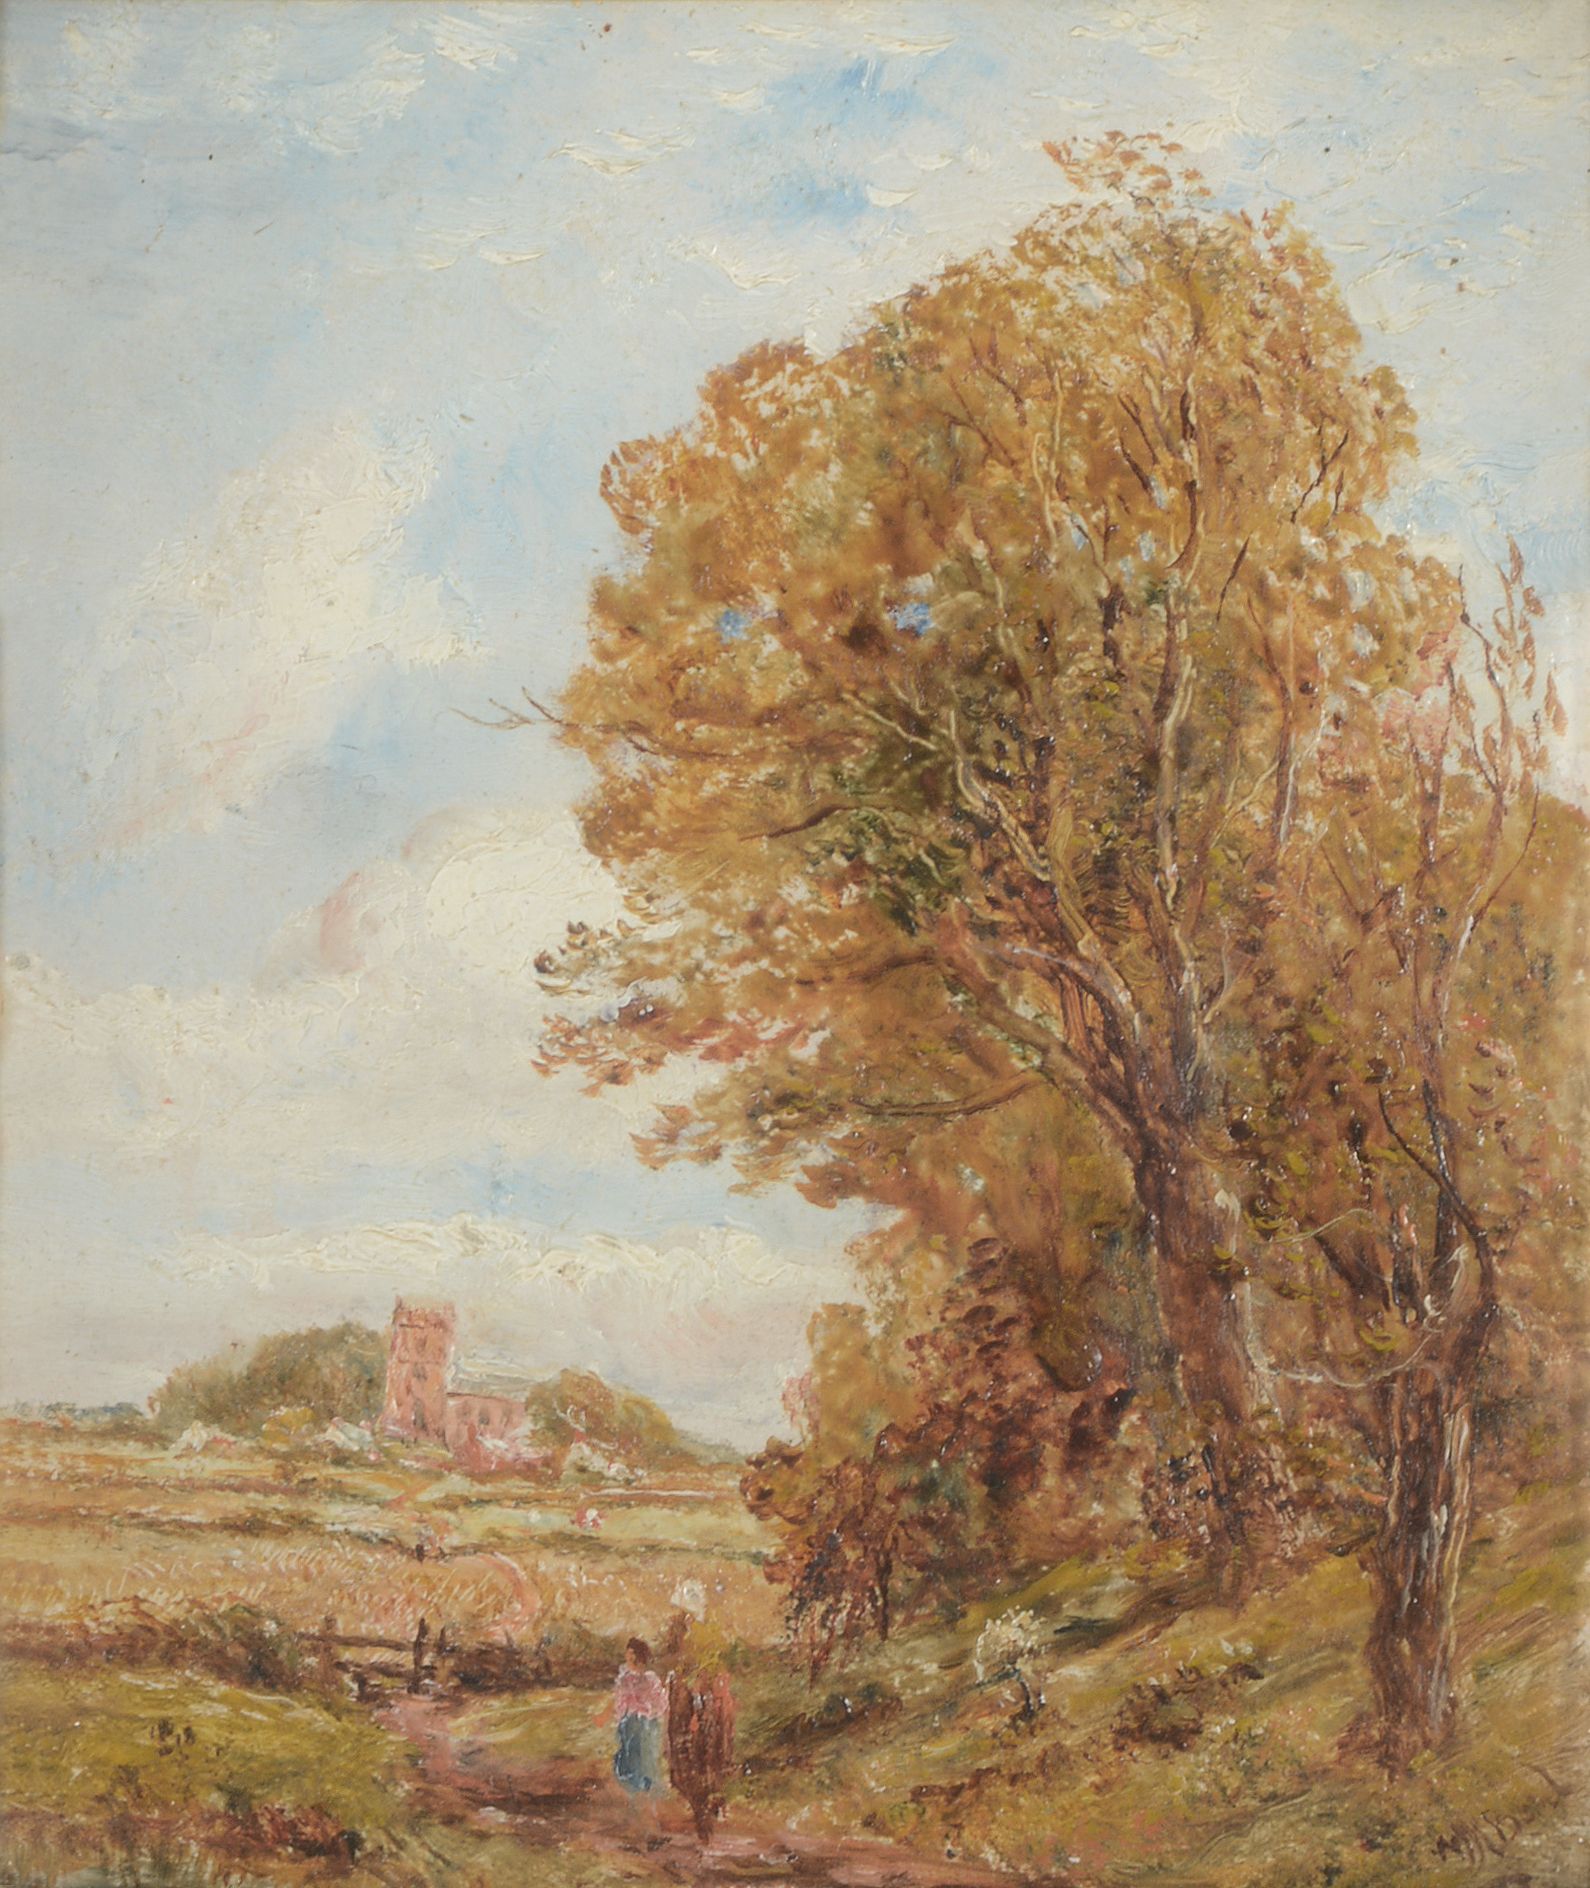 William Joseph J. C. Bond (1833-1926) - Landscape with figures on a country path; Donkey and cart on - Image 4 of 4